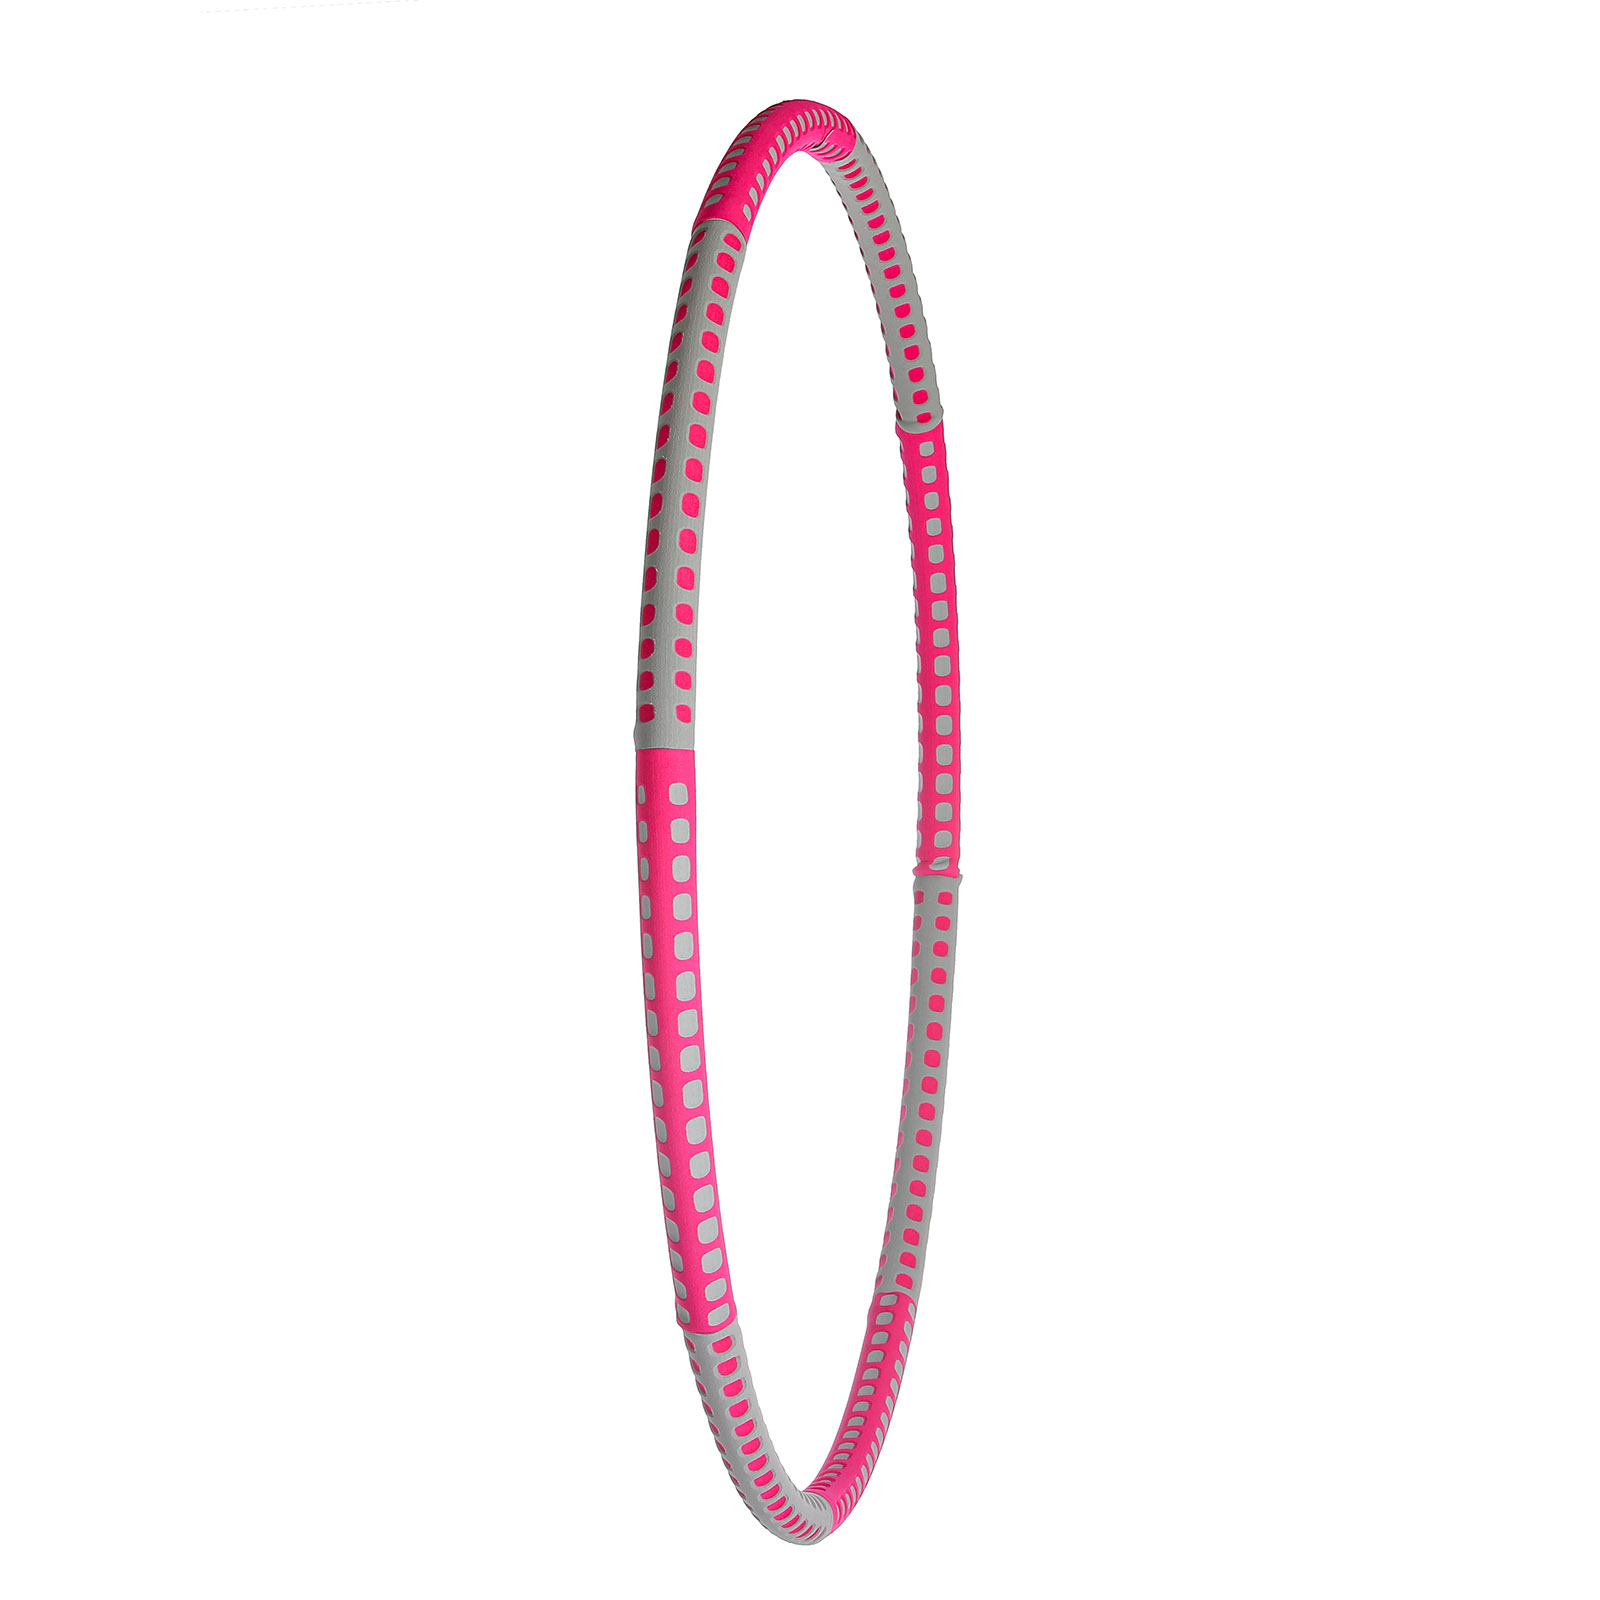 85cm-Fitness-Sport-Hoops-8-Section-Removable-Slimming-Hoops-Exercise-Yoga-Bodybuilding-Equipment-Hom-1887281-10